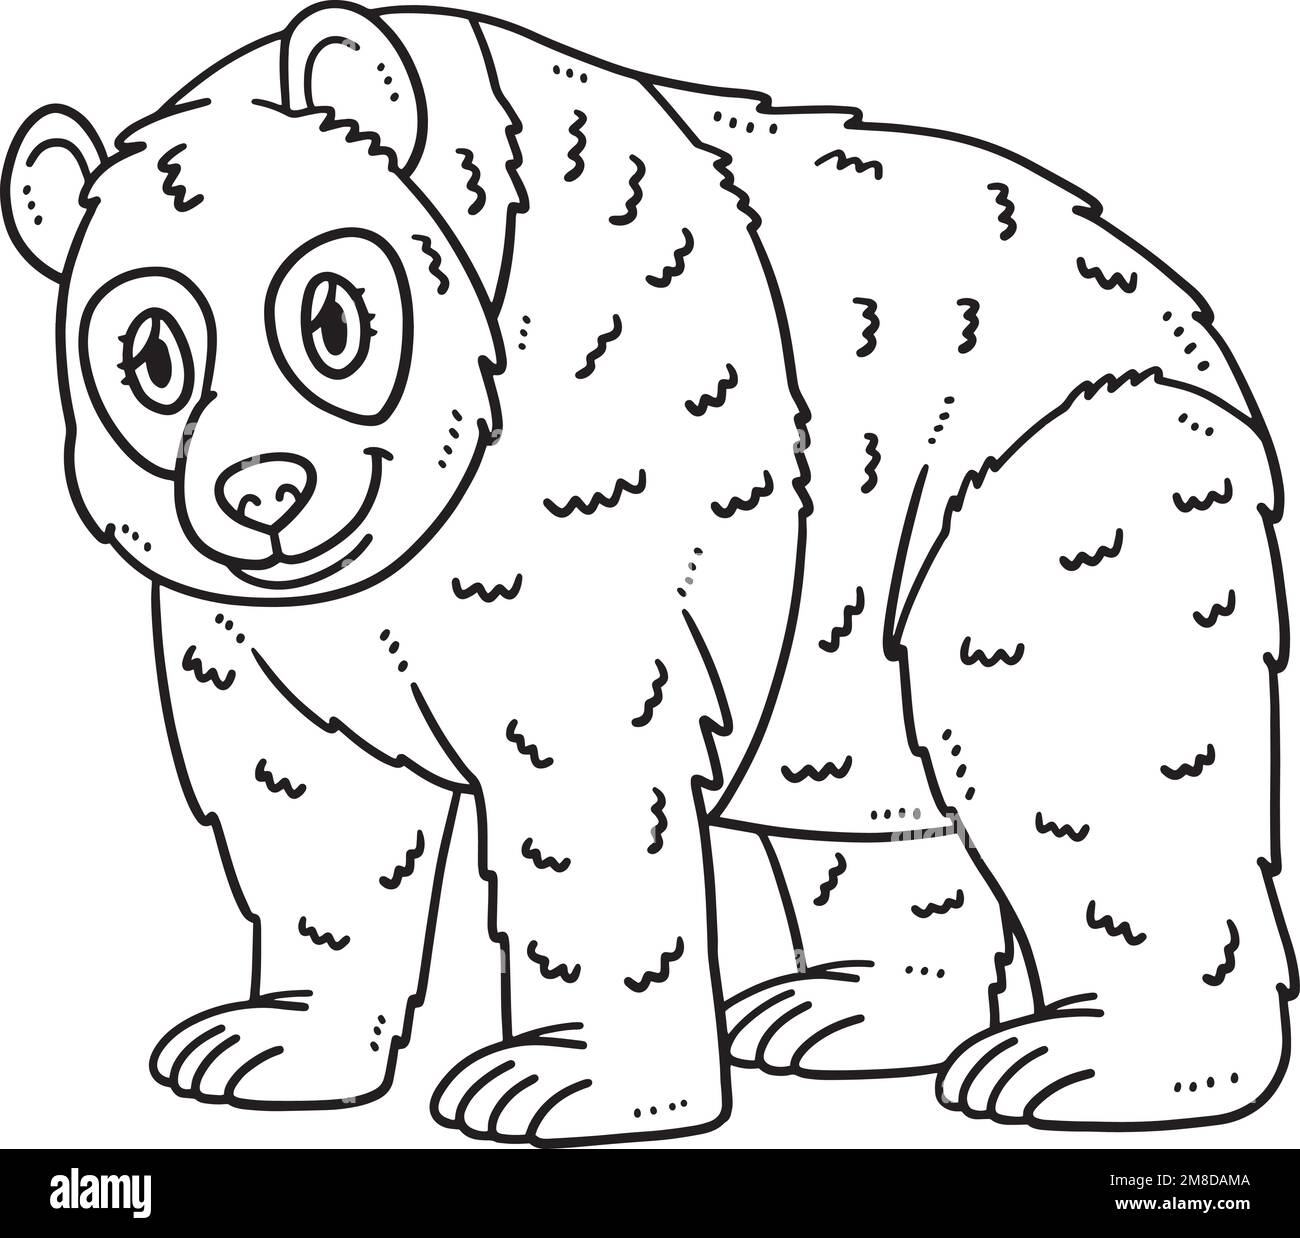 Mother Panda Isolated Coloring Page for Kids Stock Vector